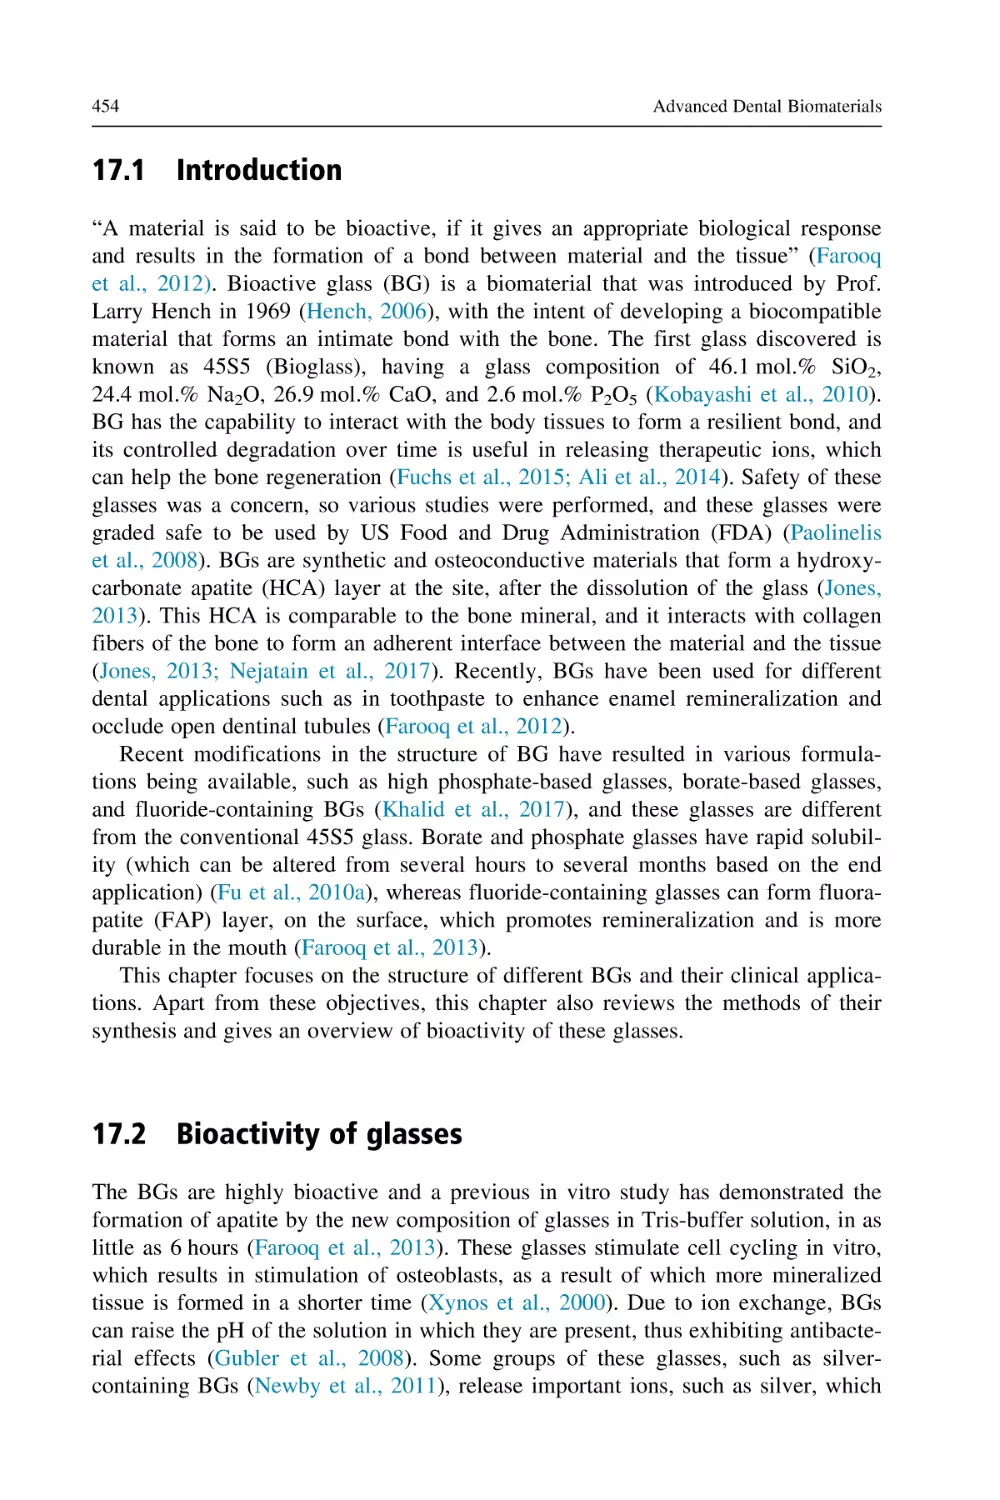 17.1 Introduction
17.2 Bioactivity of glasses